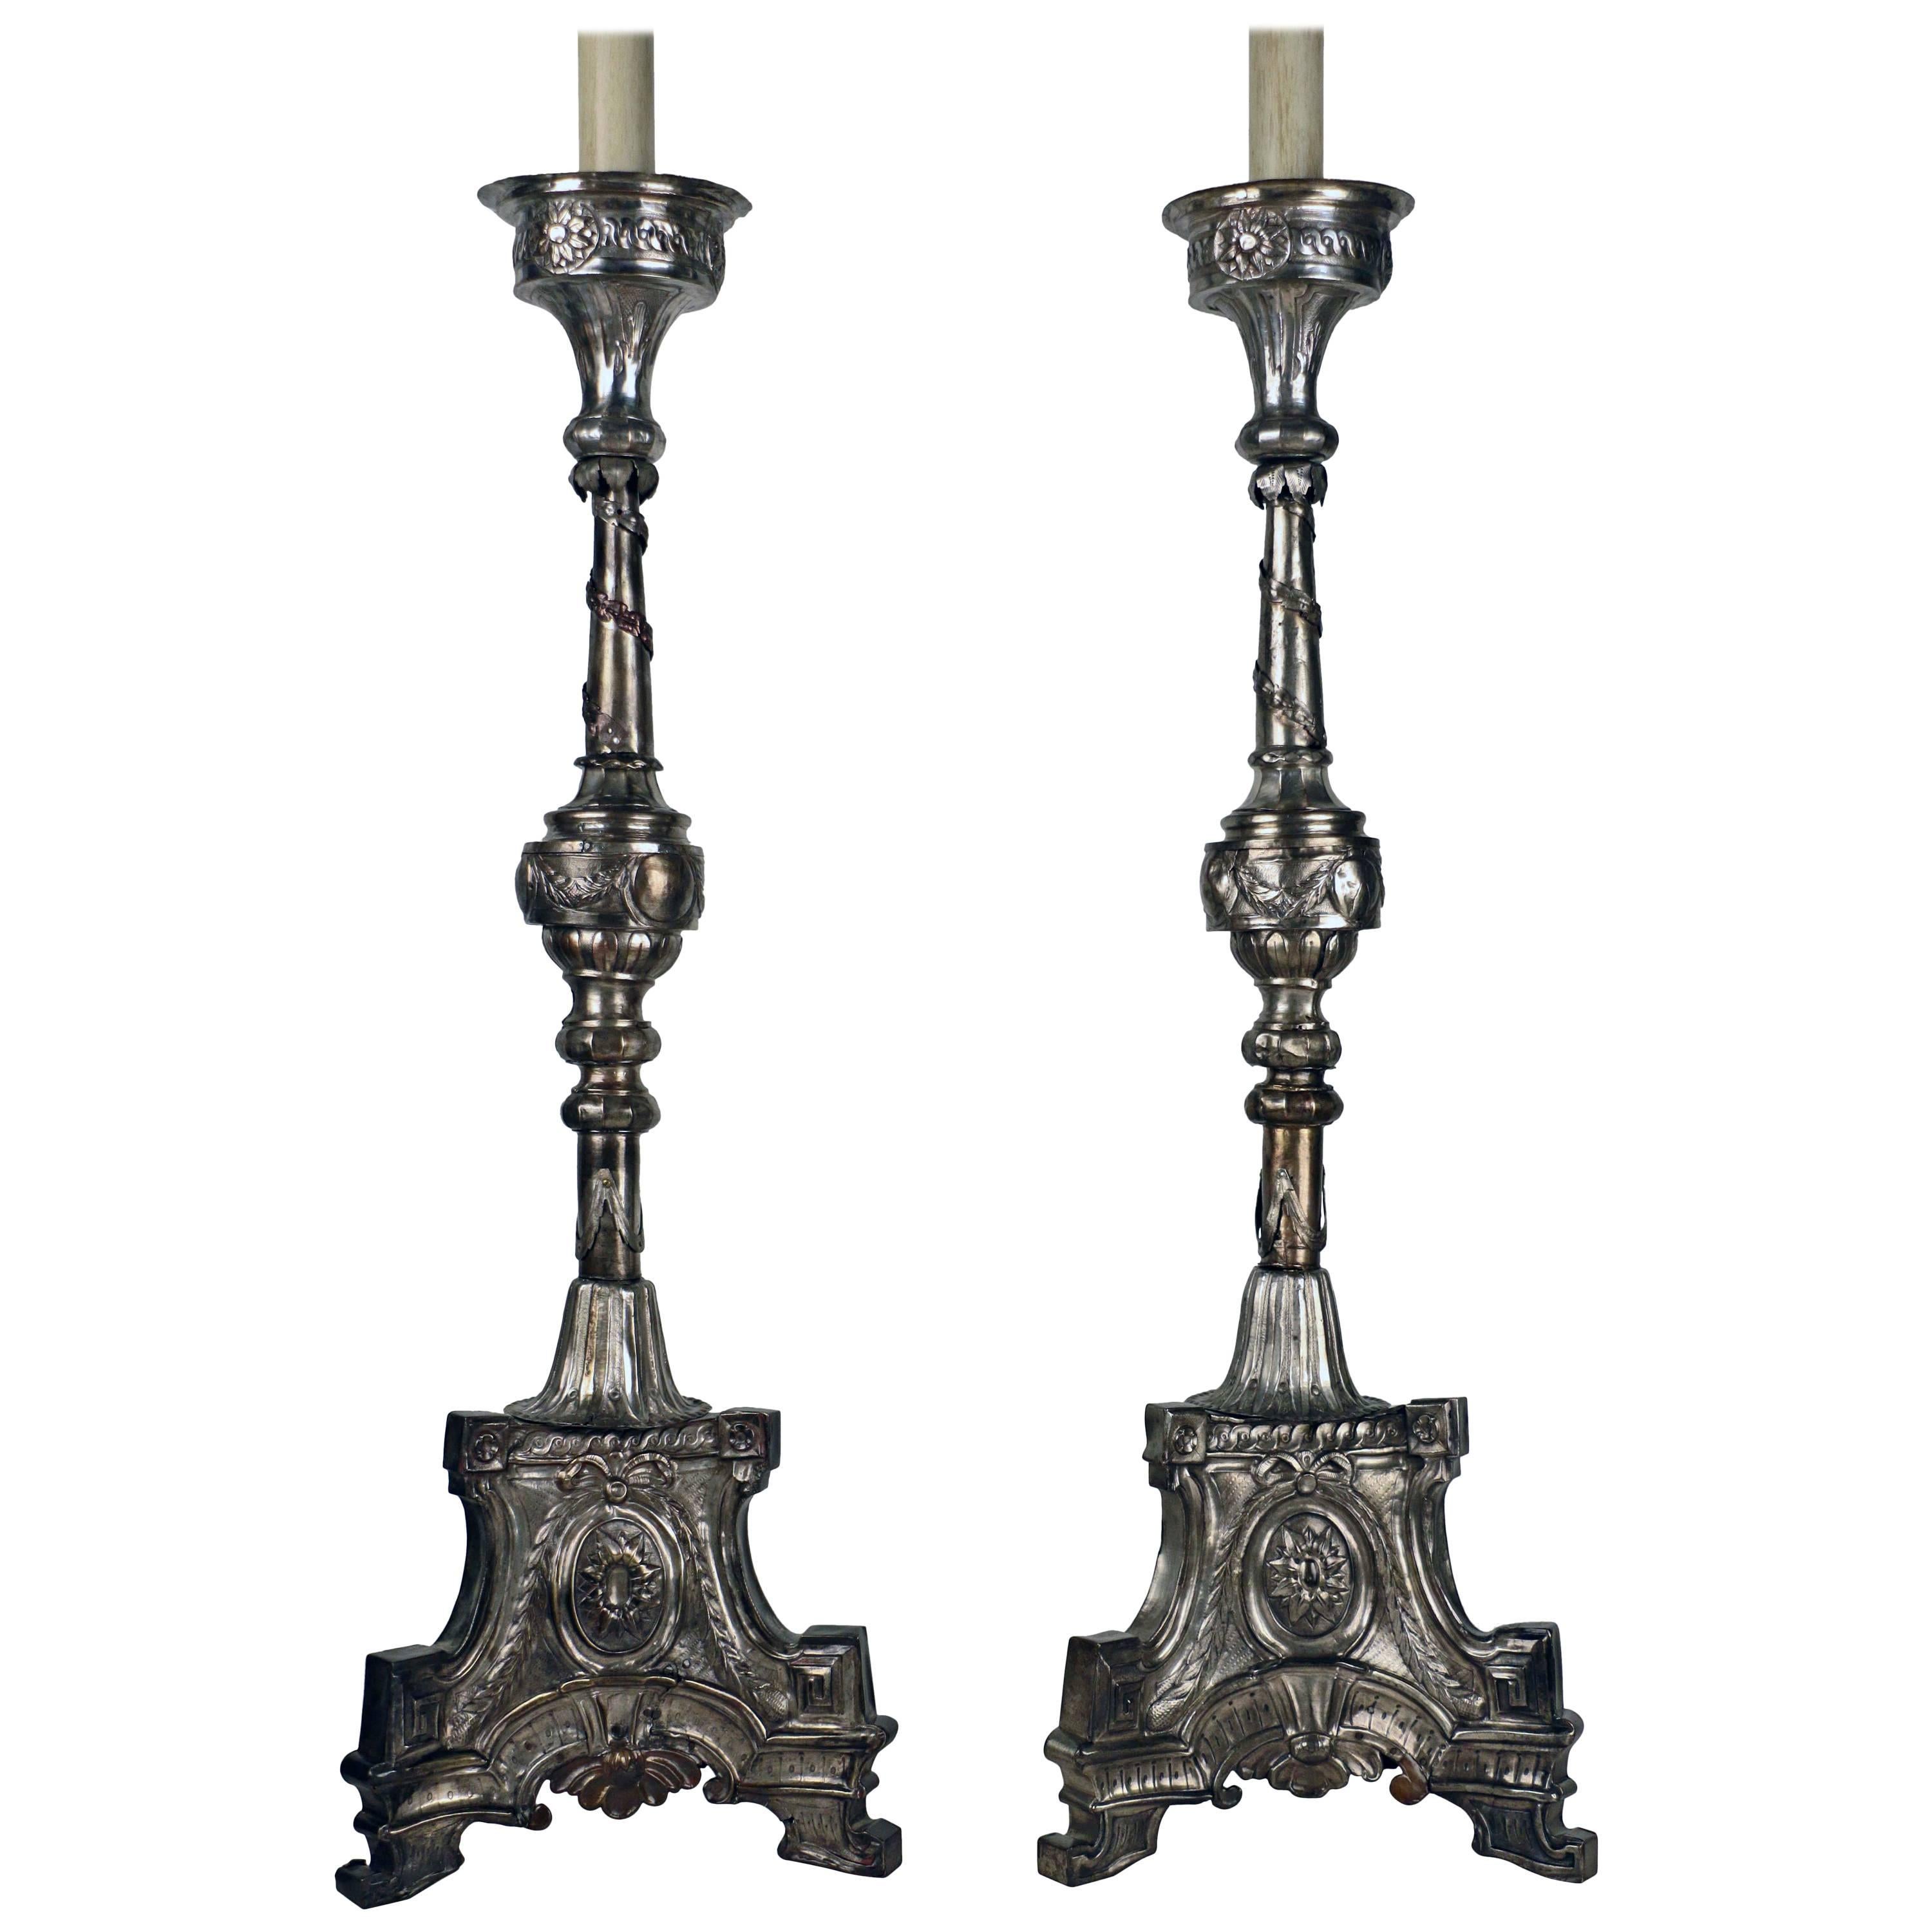 Pair of Large Late 18th Century Plated Neoclassical Candlesticks For Sale